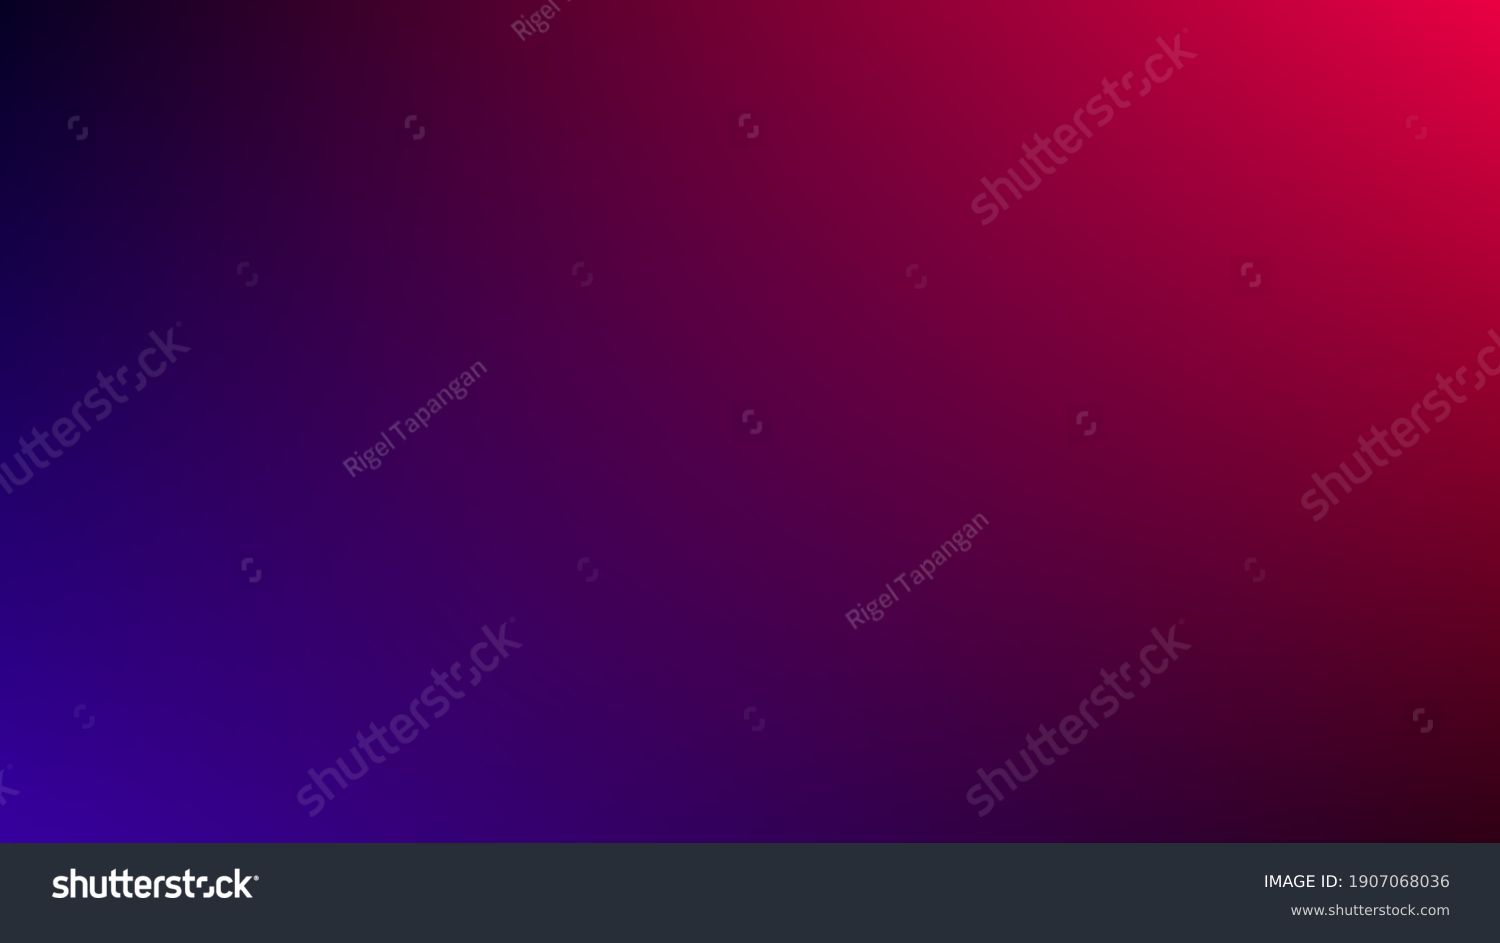 Abstract Background. Gradient blue to red. You can use this background for your content like as video, streaming, promotion, gaming, advertisement, social media concept, presentation, website, card. #1907068036